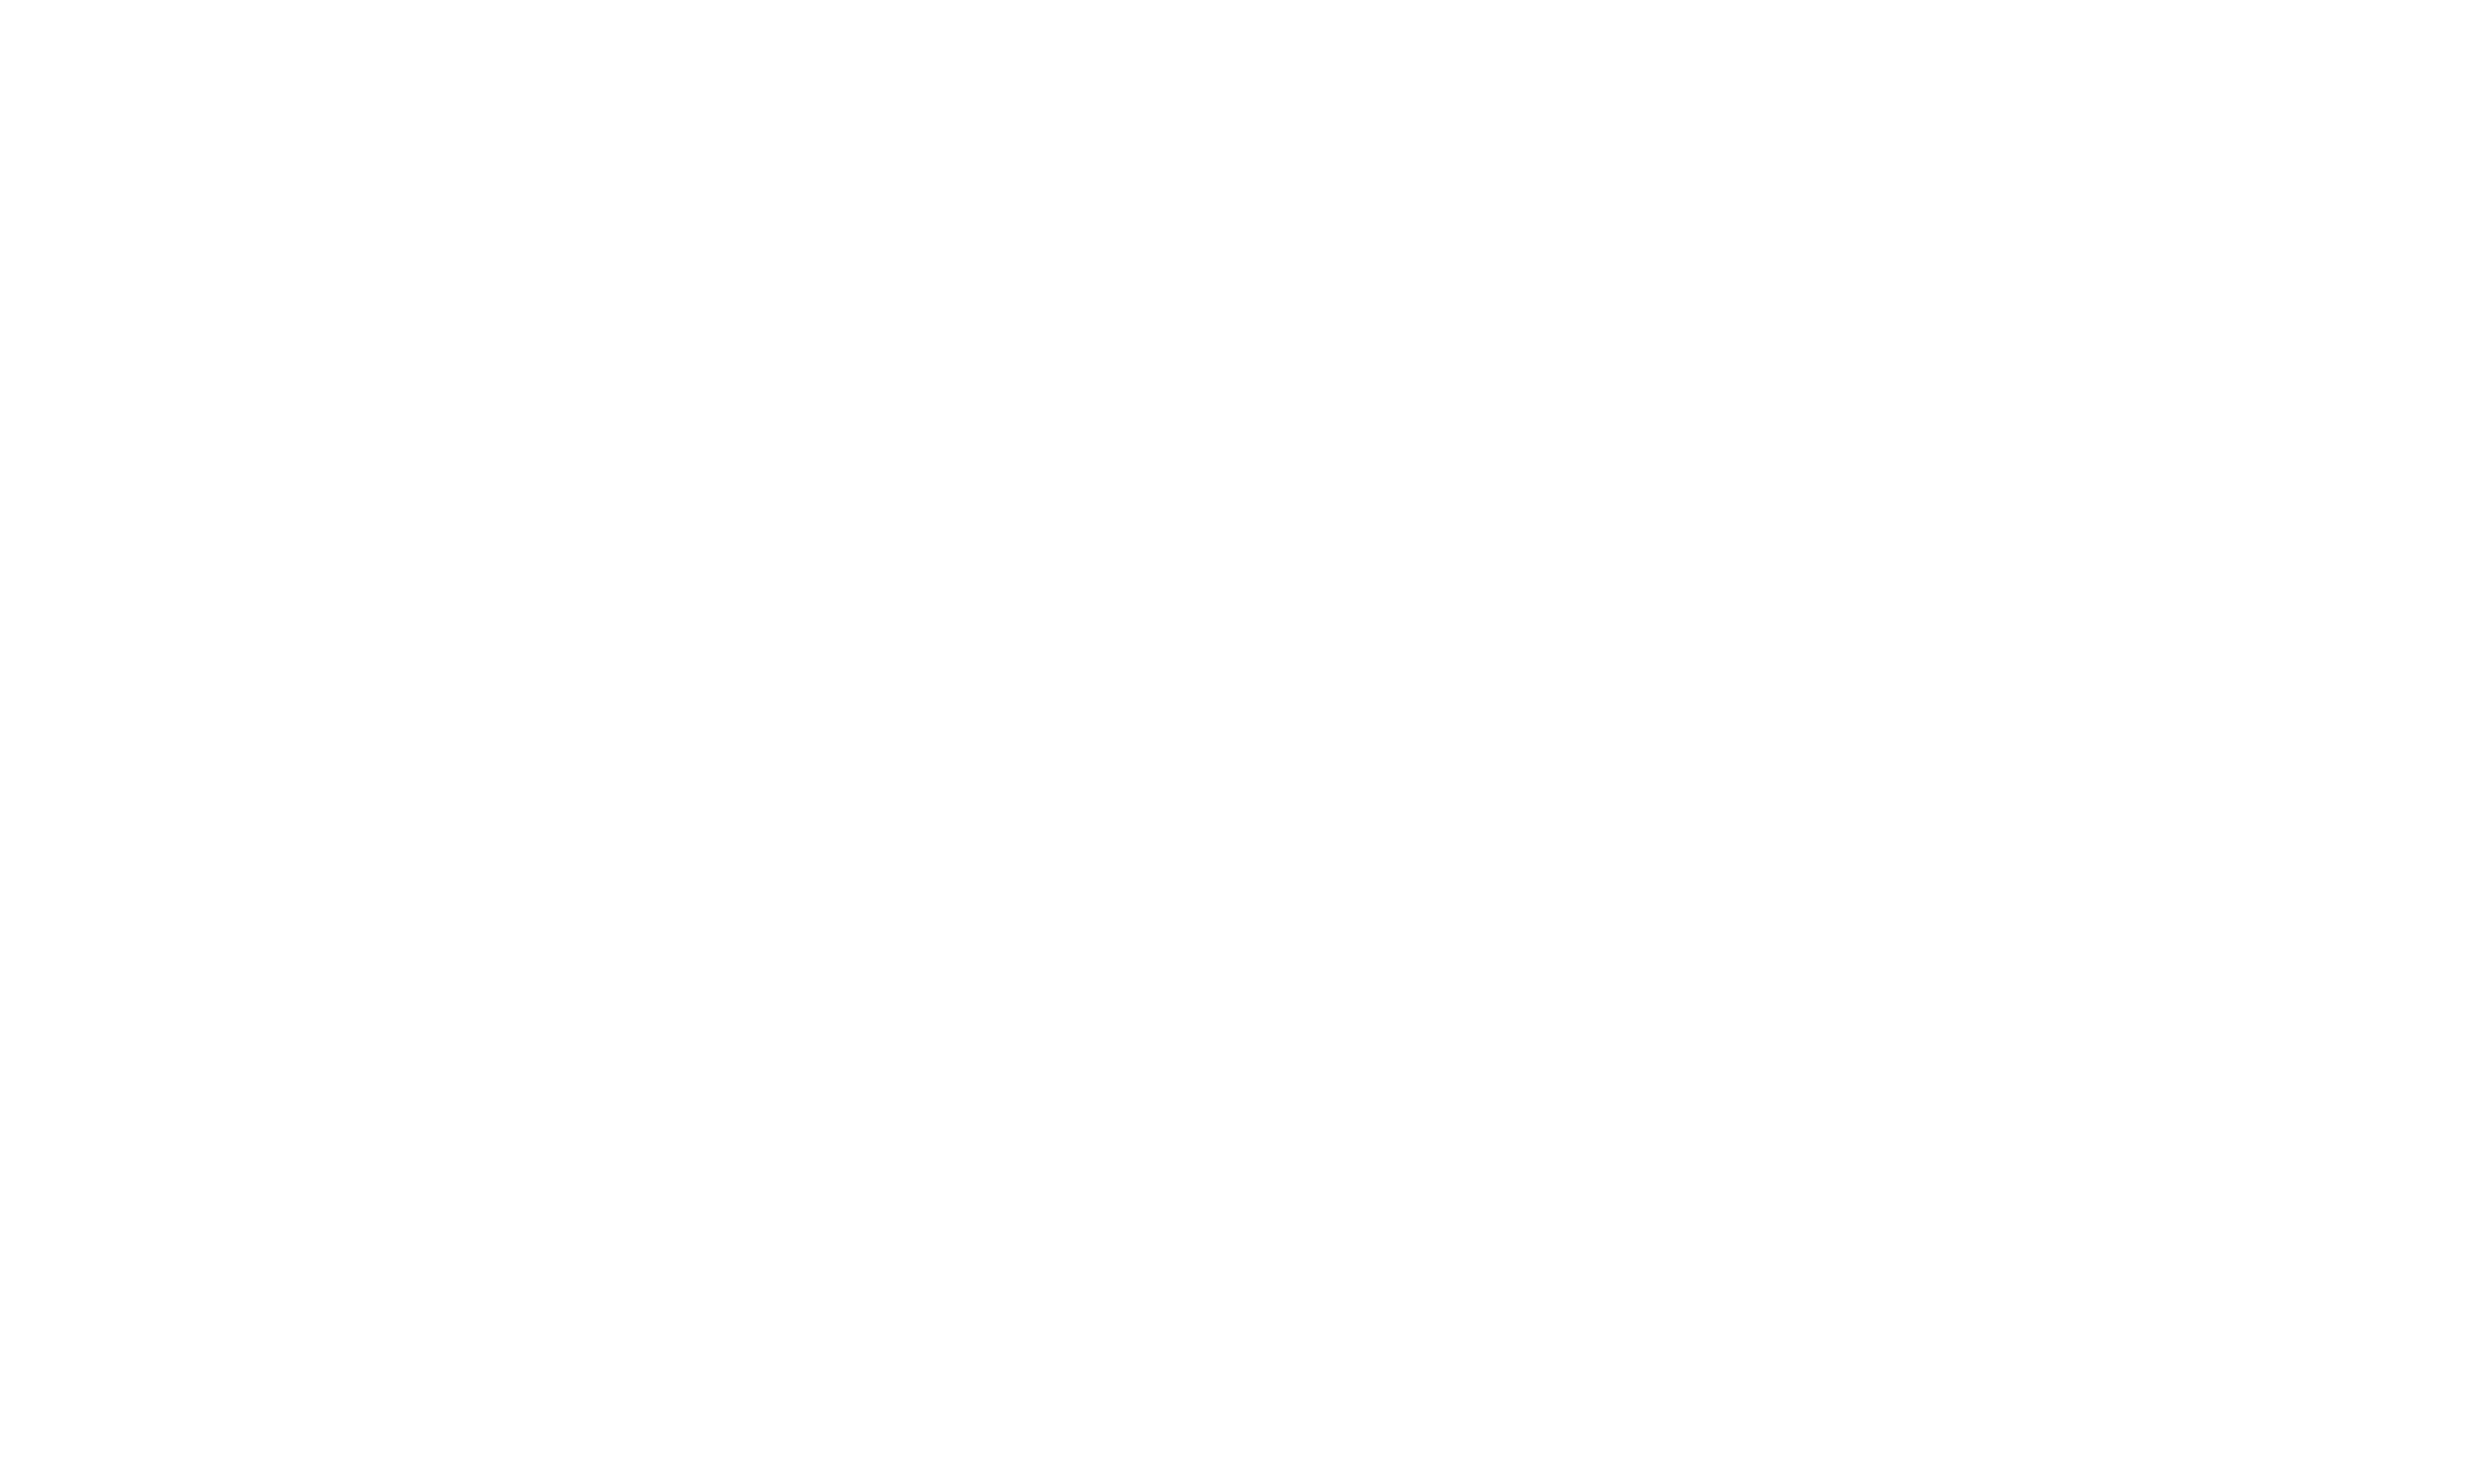 OpenWeb Integrated Software